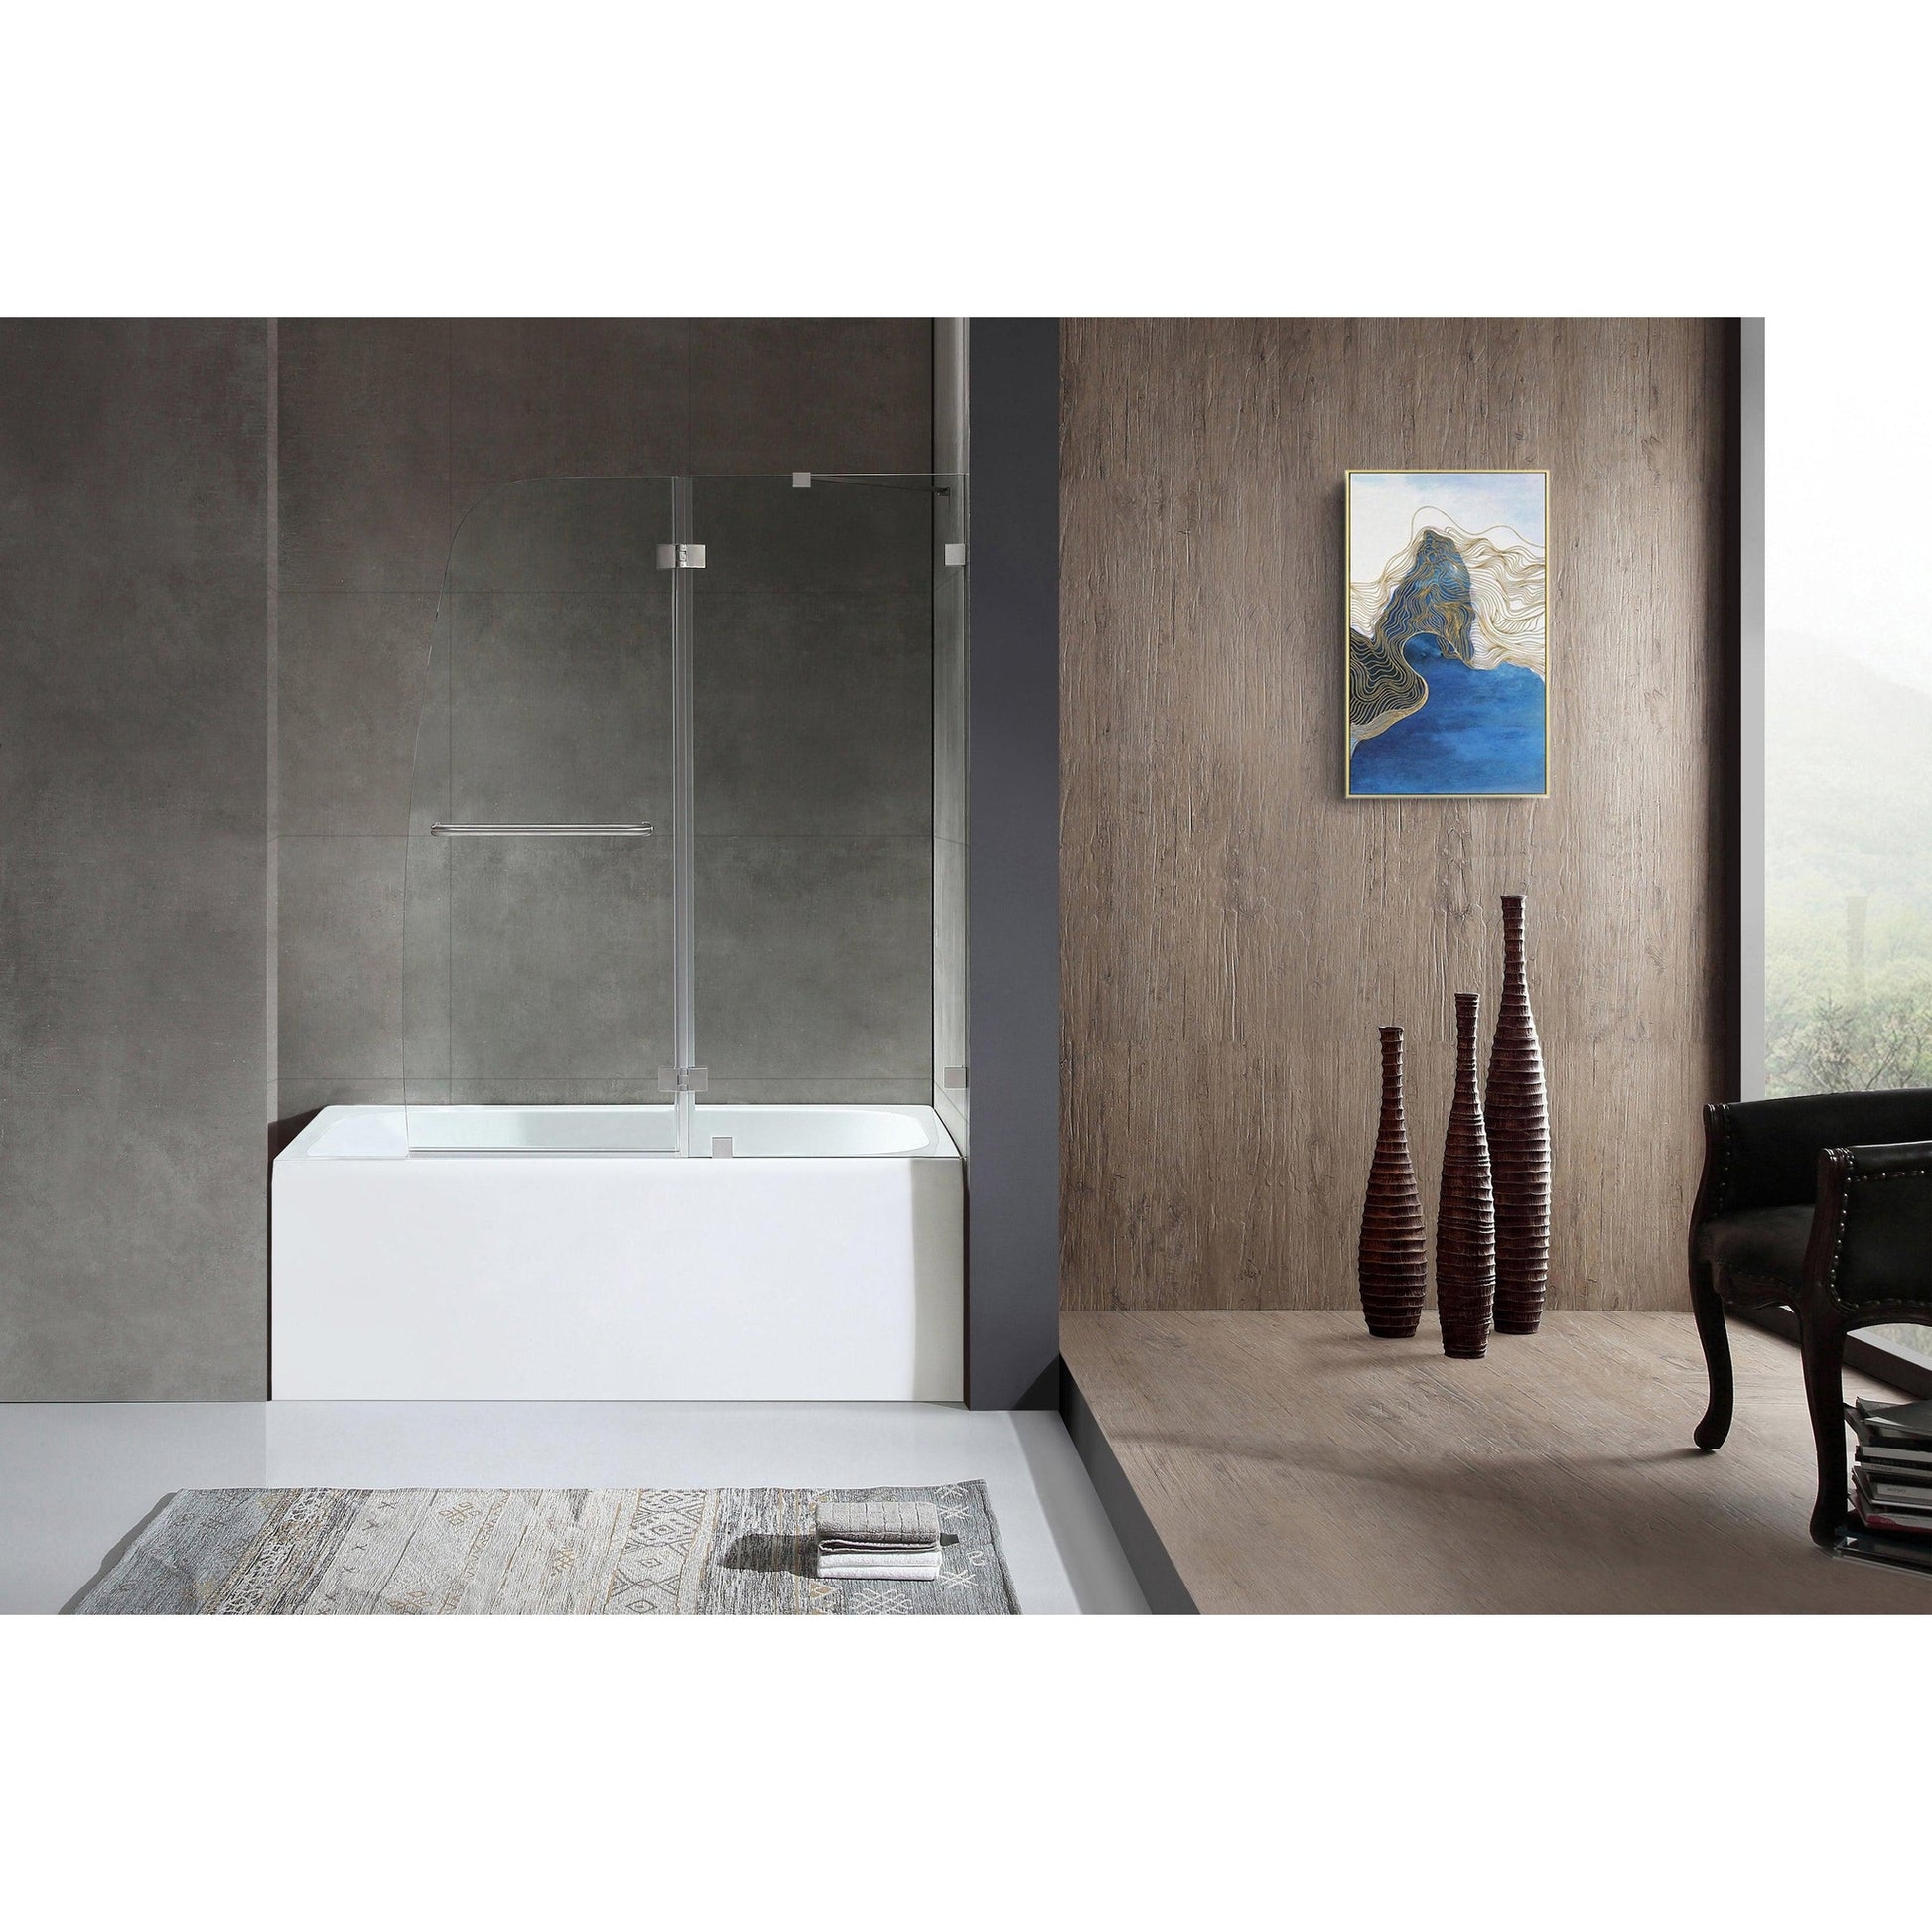 ANZZI Herald Series White "60 x 32" Alcove Right Drain Rectangular Bathtub With Built-In Flange and Frameless Brushed Nickel Hinged Door